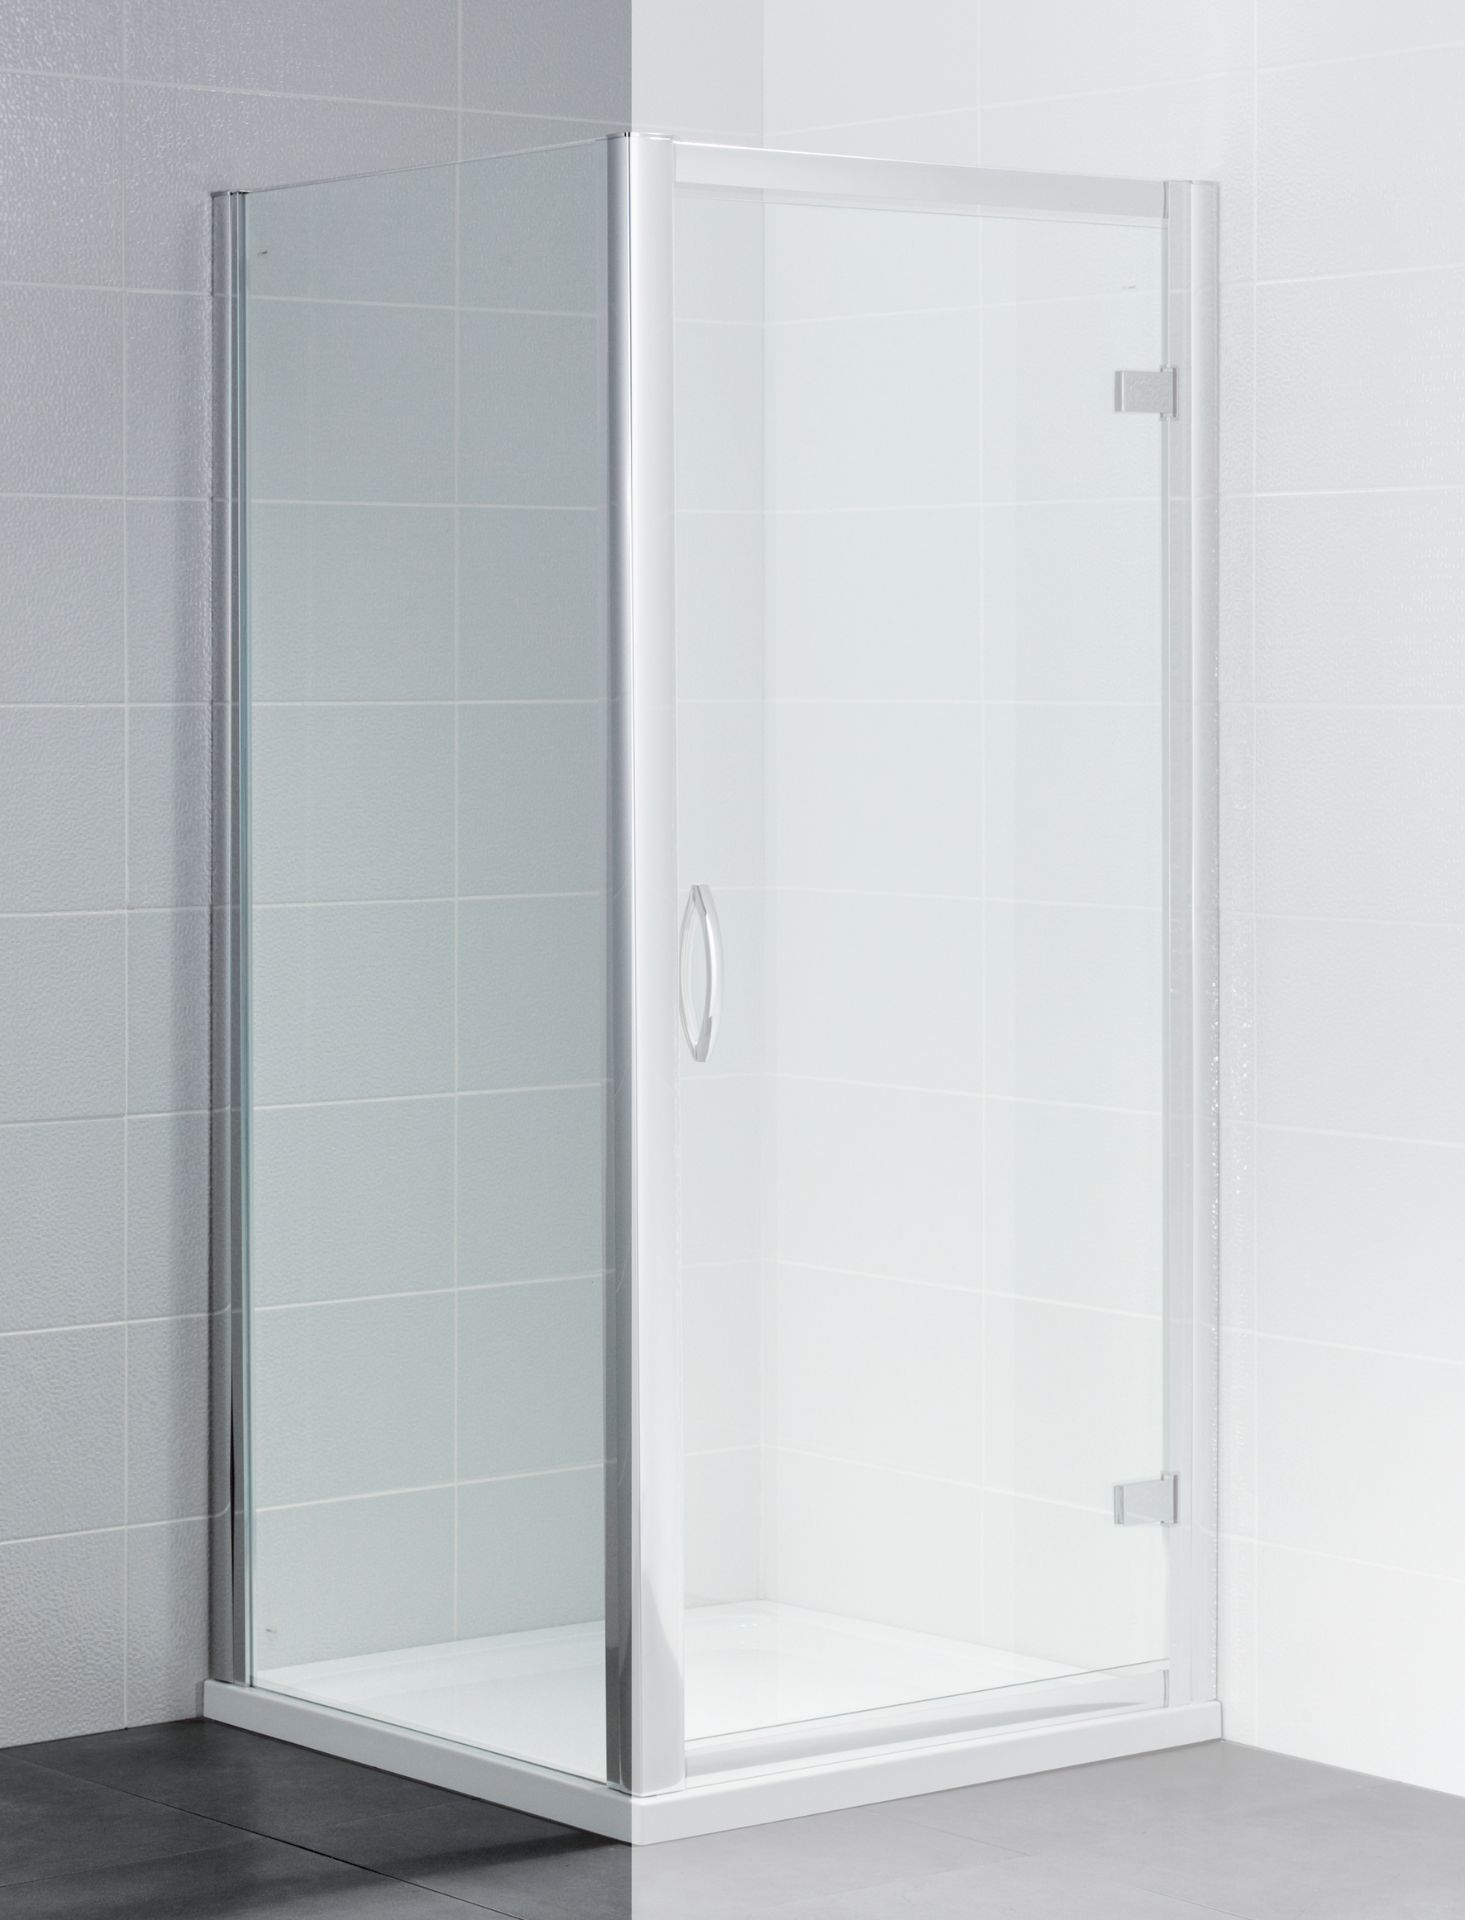 11 X BRAND NEW APRIL IDENTITI WETROOM PANELS - IN POLISHED SILVER ( 700 X 1950 MM ) - ON 1 PLT (